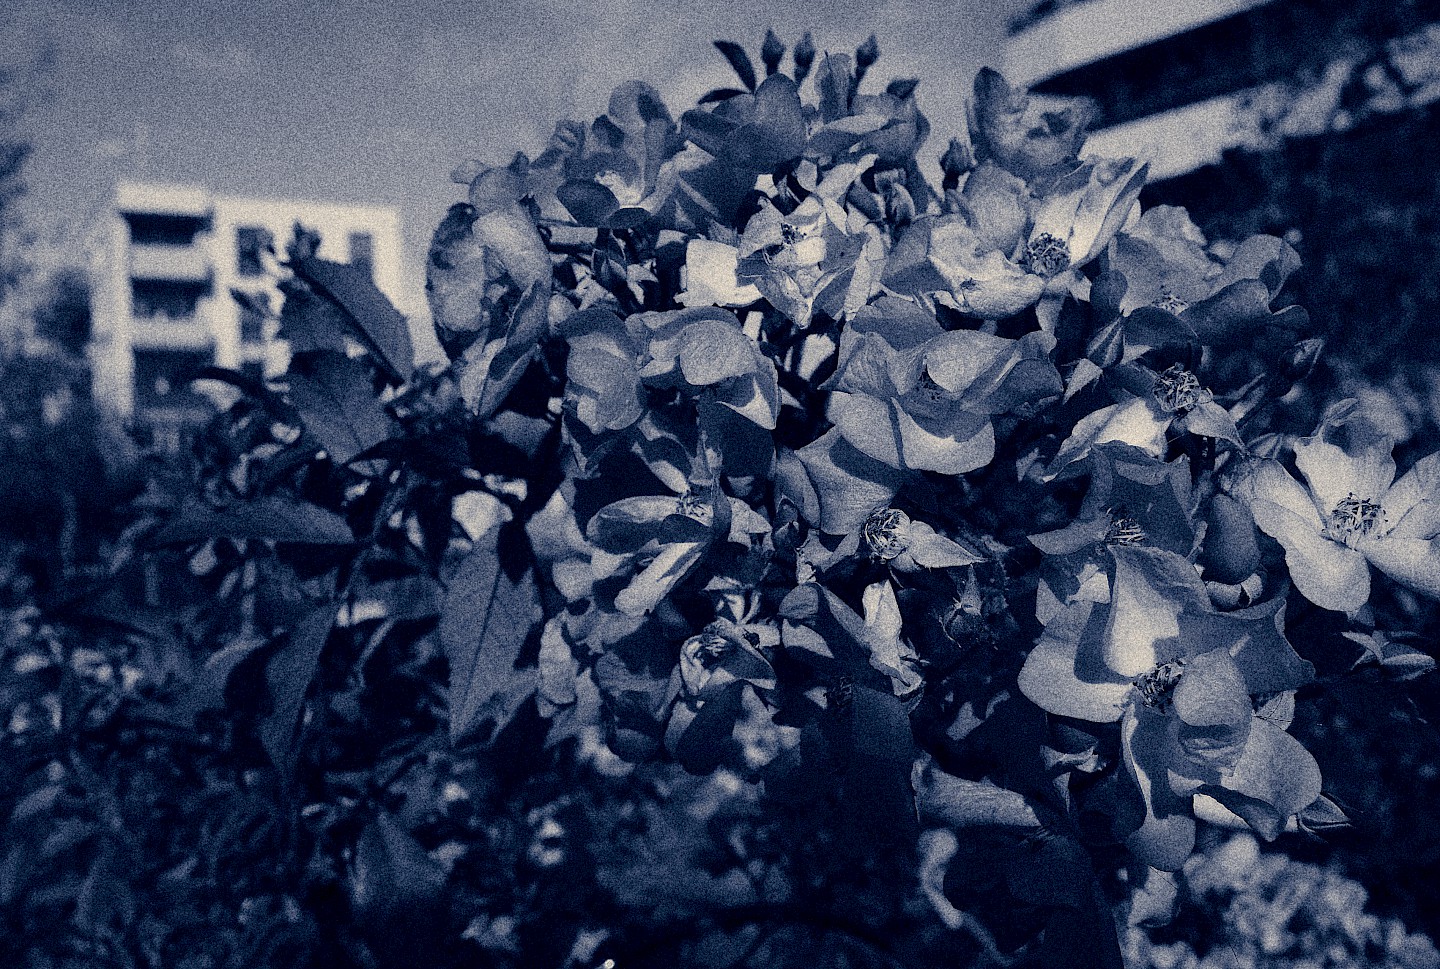 Photo from the exhibition "Blue flower" with the process of cyanotype